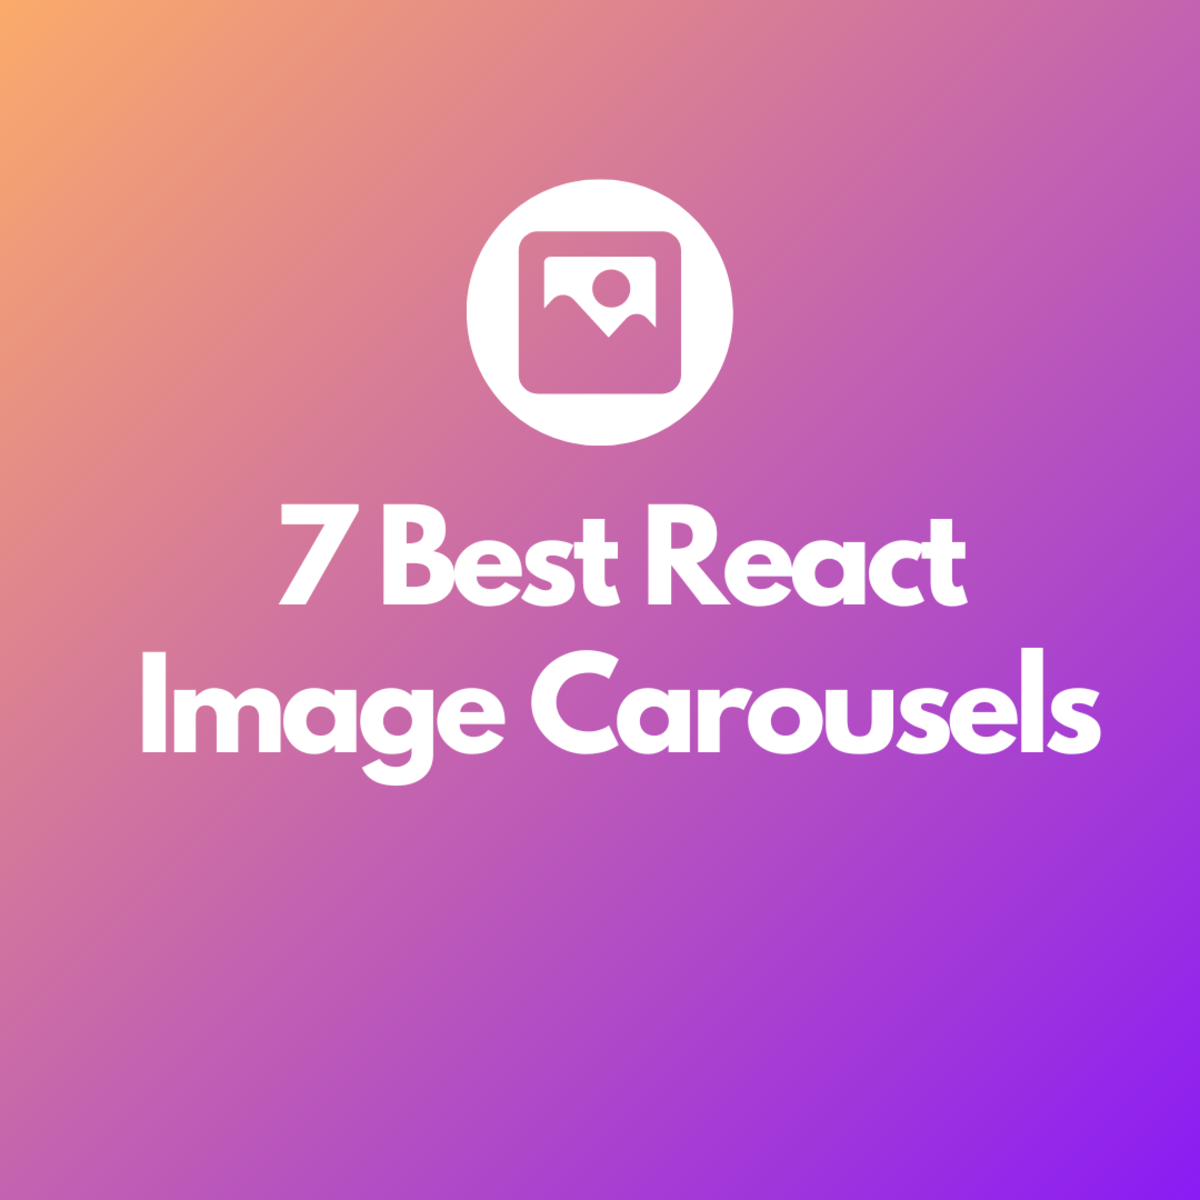 7 Best React Image Carousels to Check Out: The Ultimate List